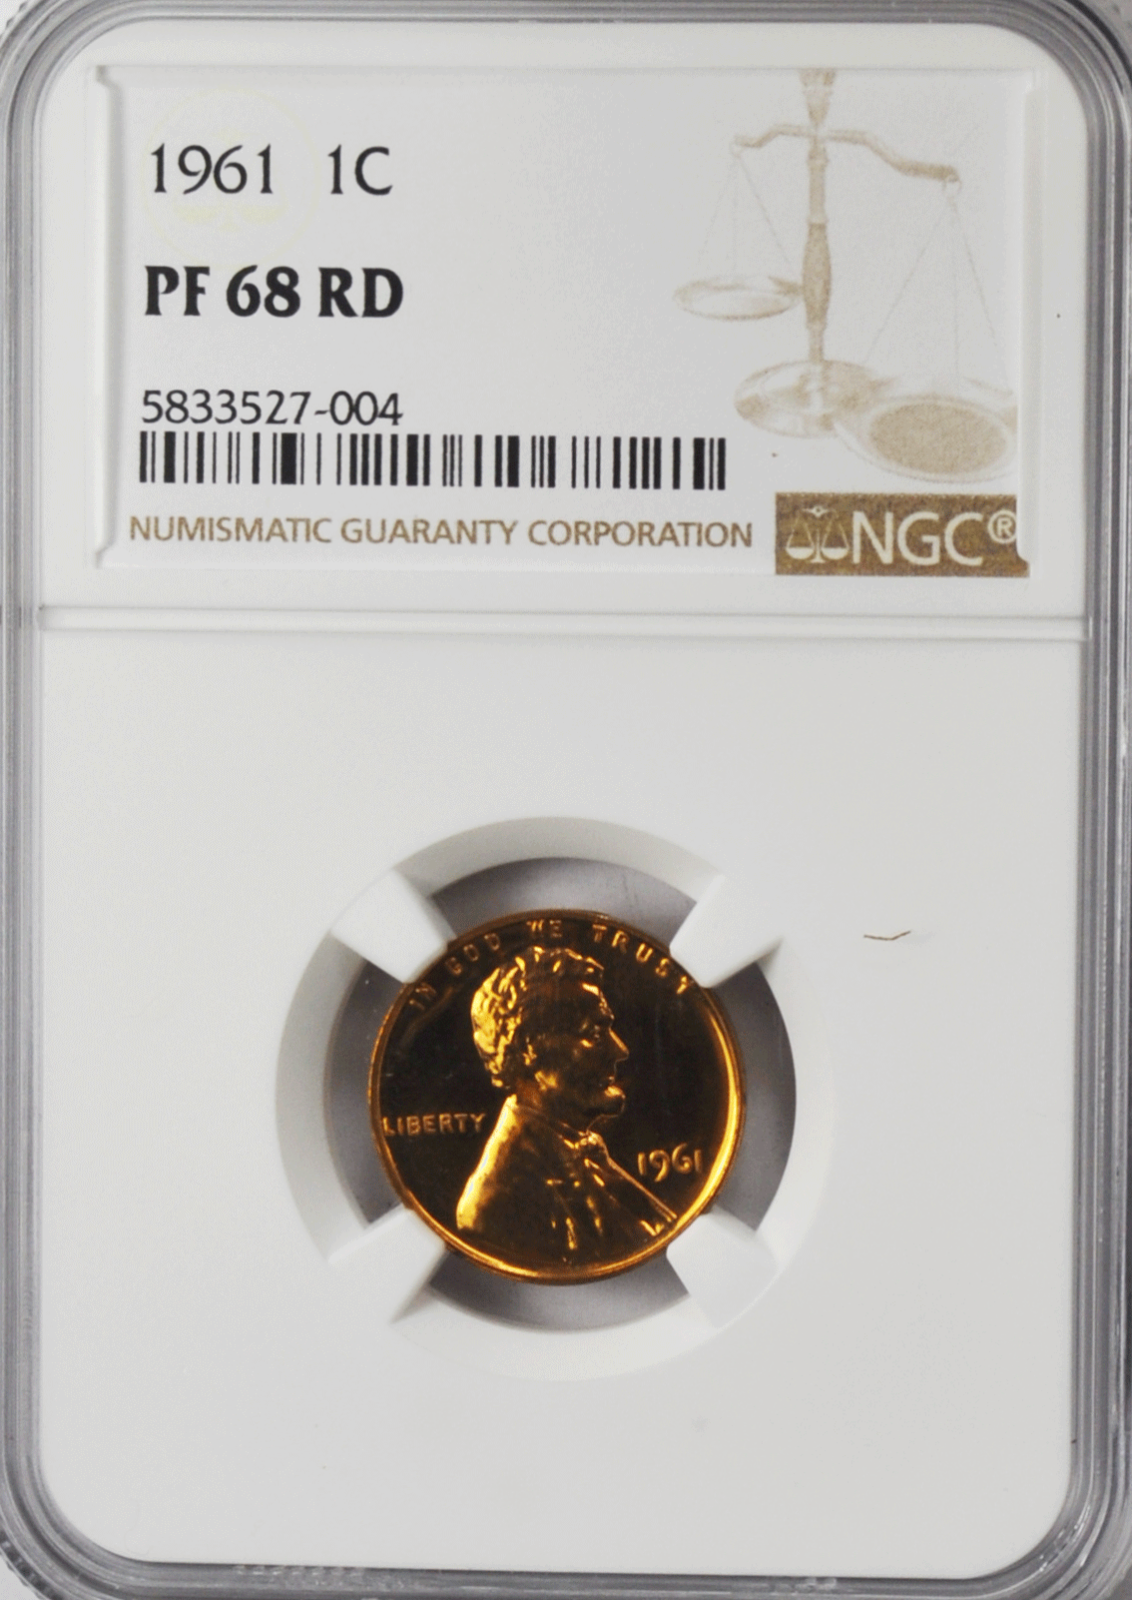 1961 1c Proof Lincoln Memorial Cent One Penny NGC PF68 RD Gem Uncirculated